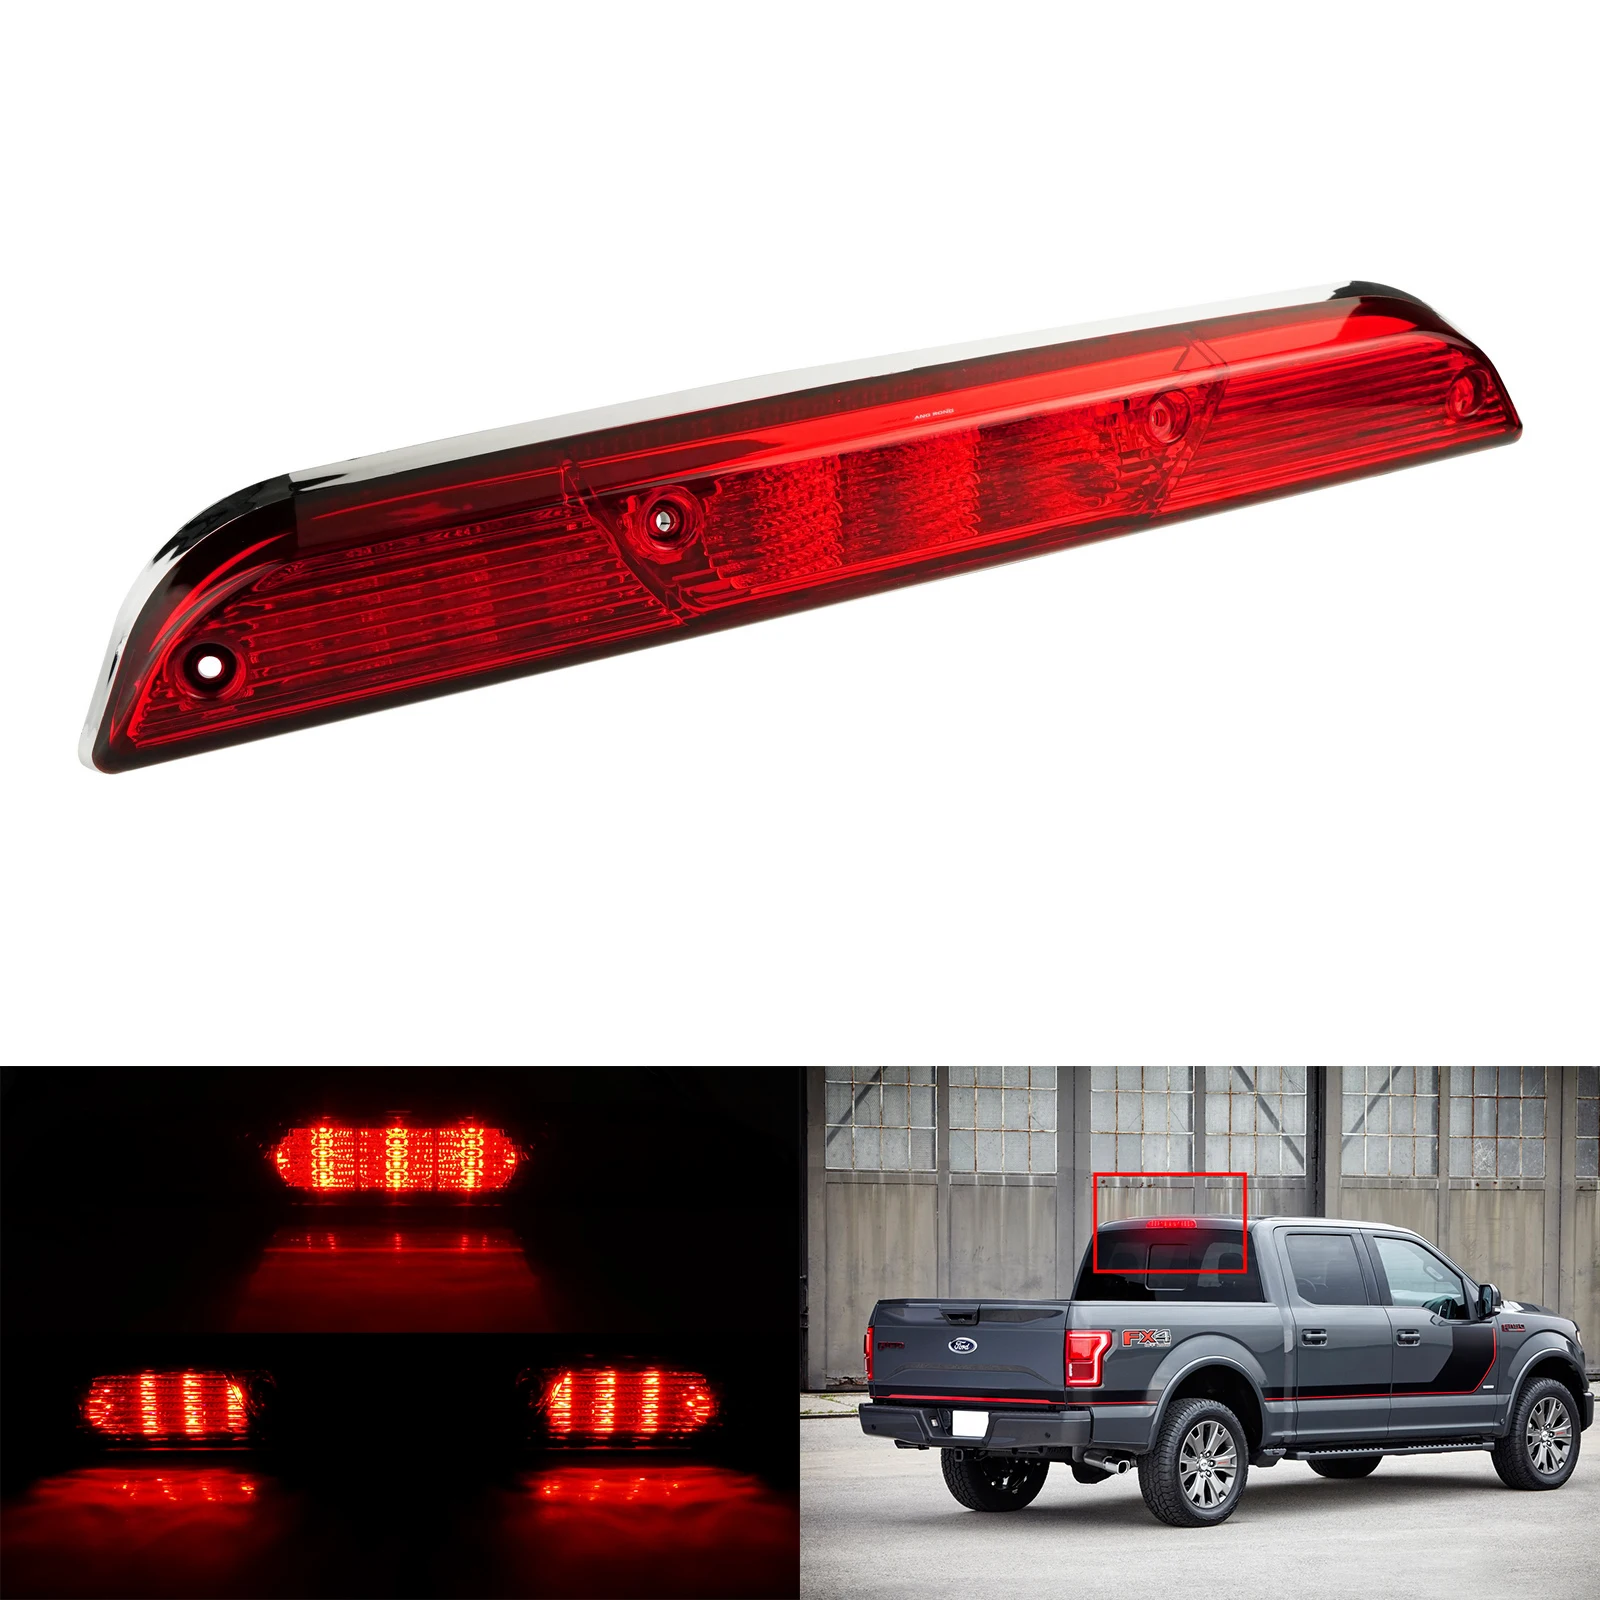 

ANGRONG 1x LED 3RD High Mount Tail Brake Stop Cargo Light Fit Ford F150 F250 F350 Ranger